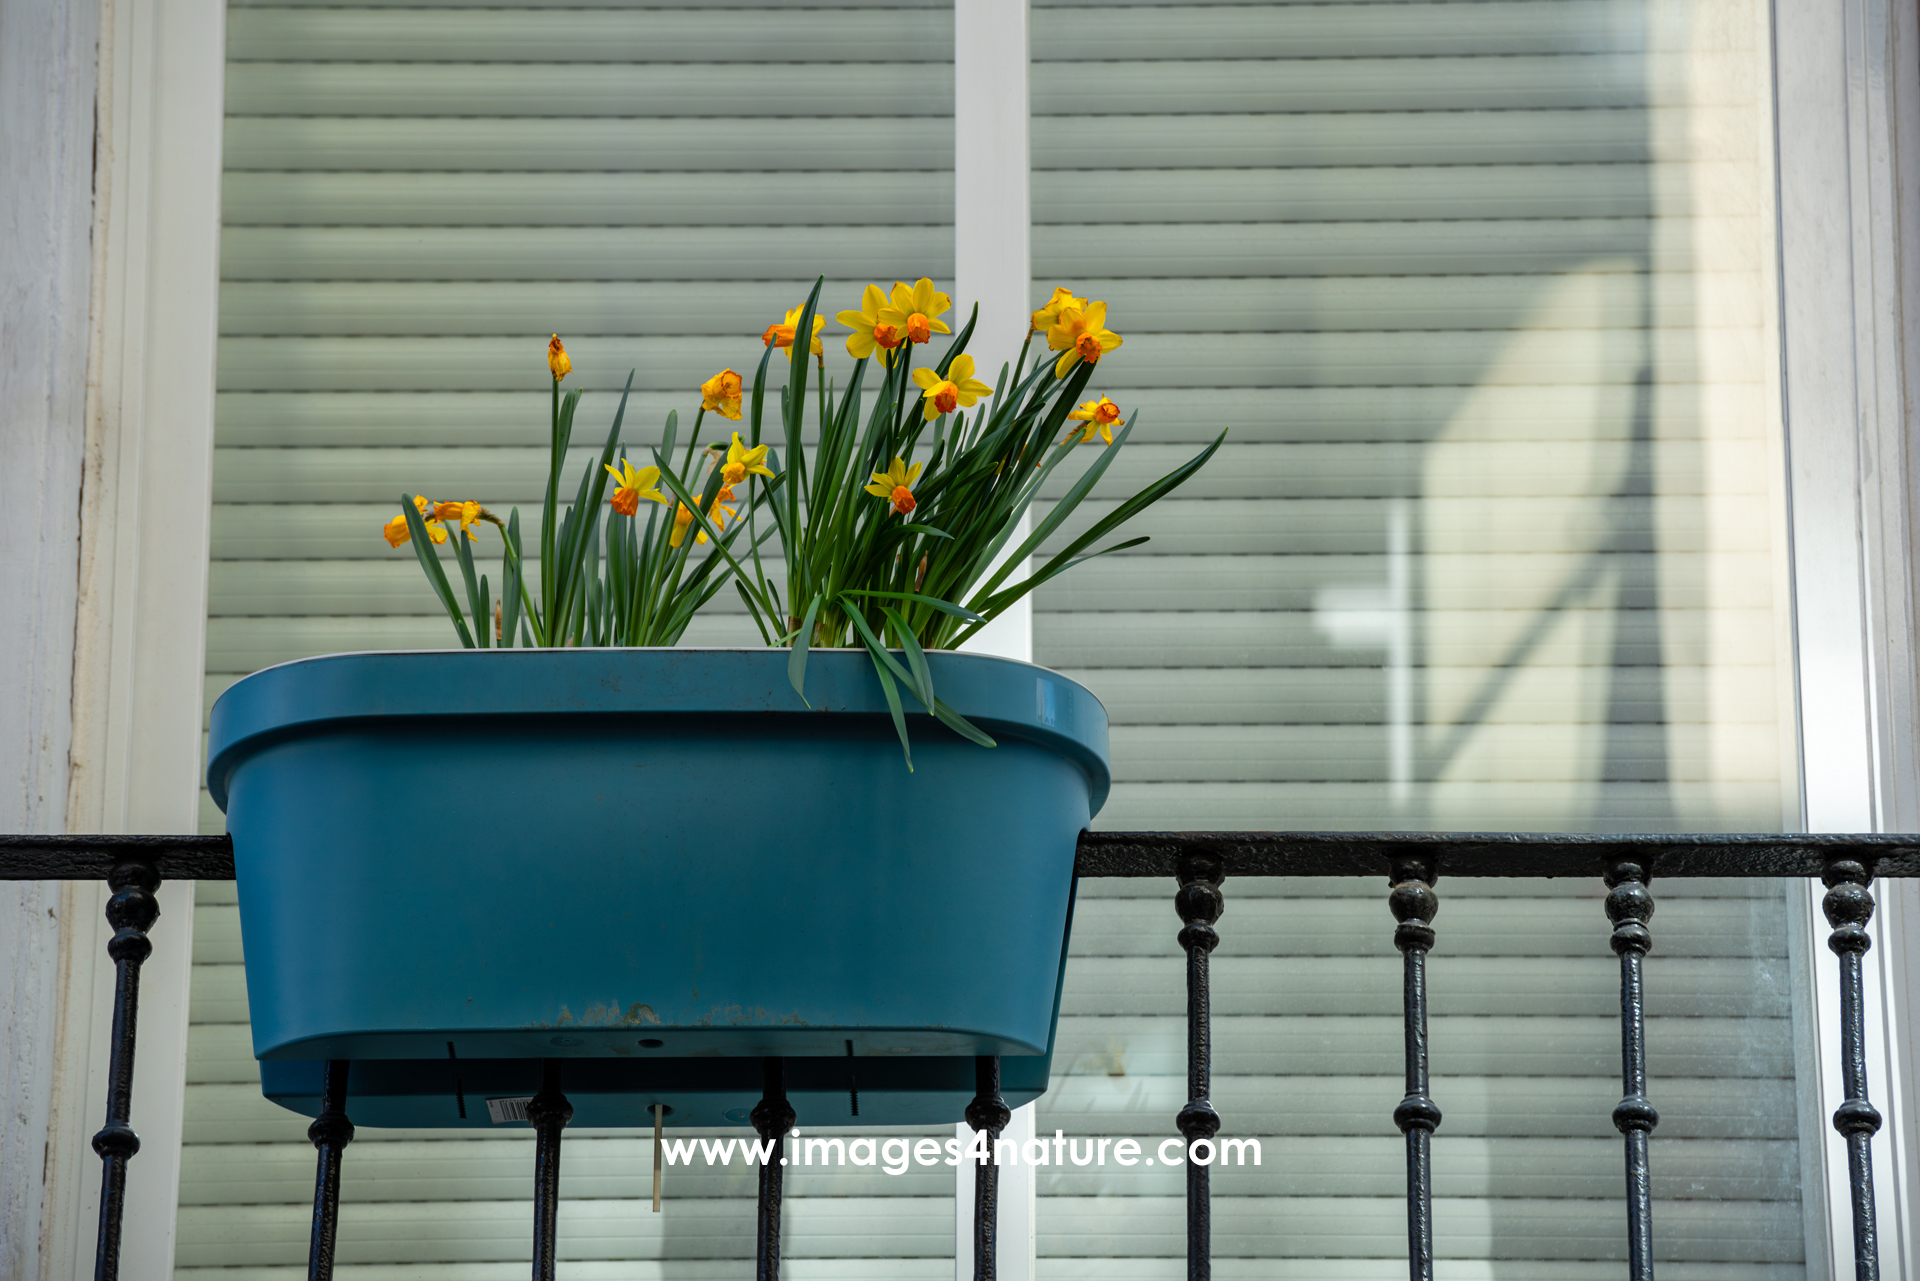 Close-up on a green flower pot with daffodils hanging on a balcony railing